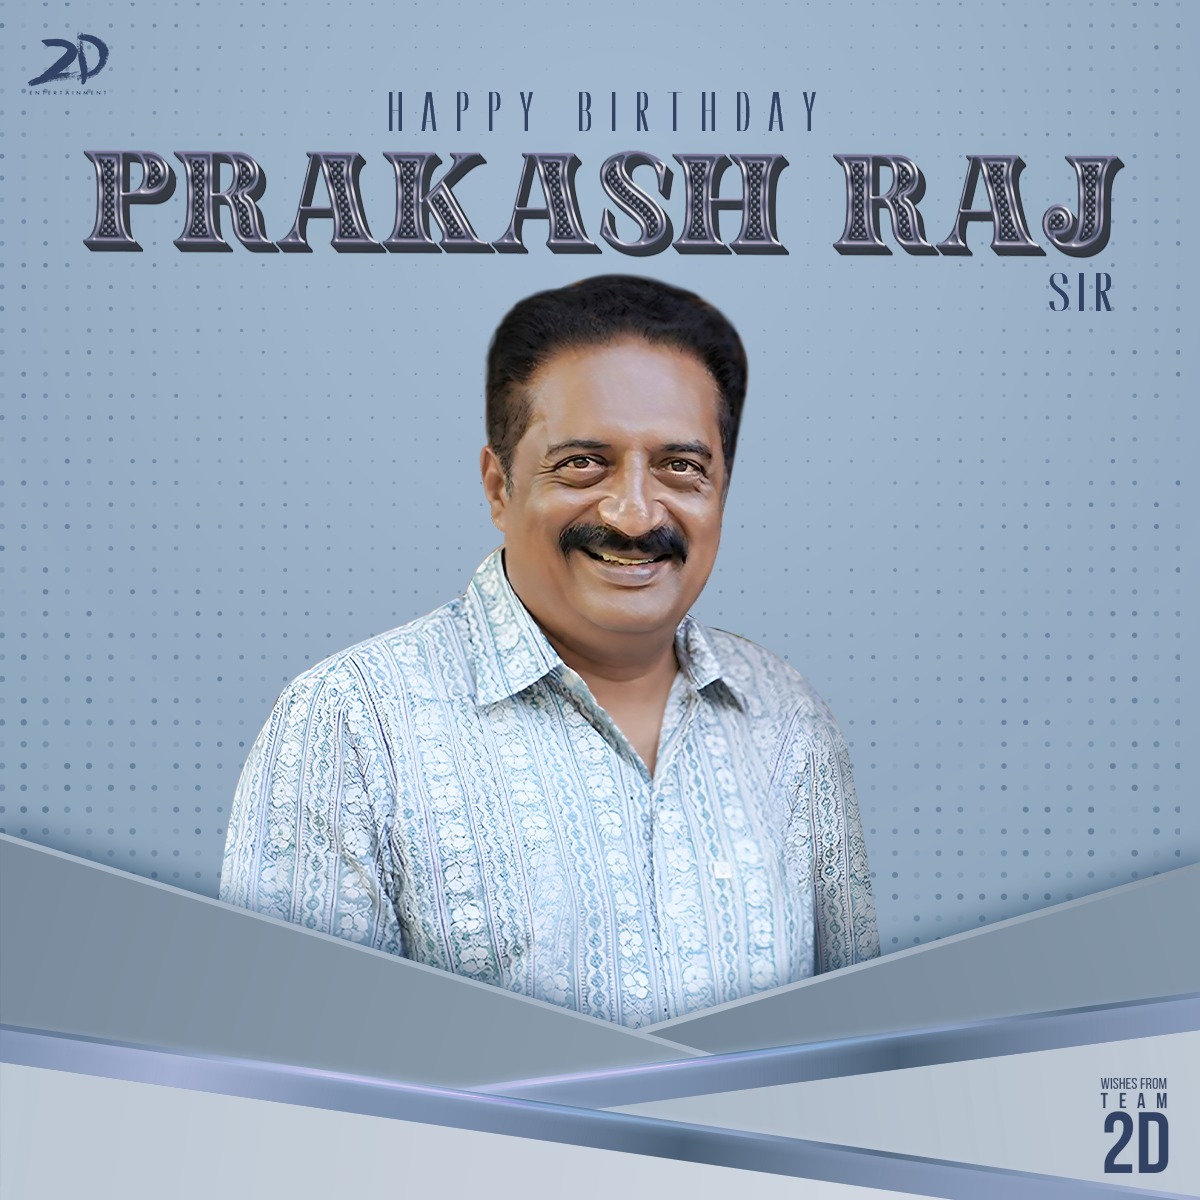 Happy Birthday to the versatile and charismatic, @prakashraaj sir! Here's to a day filled with joy, laughter, and more accolades✨ #HBDPrakashRaj